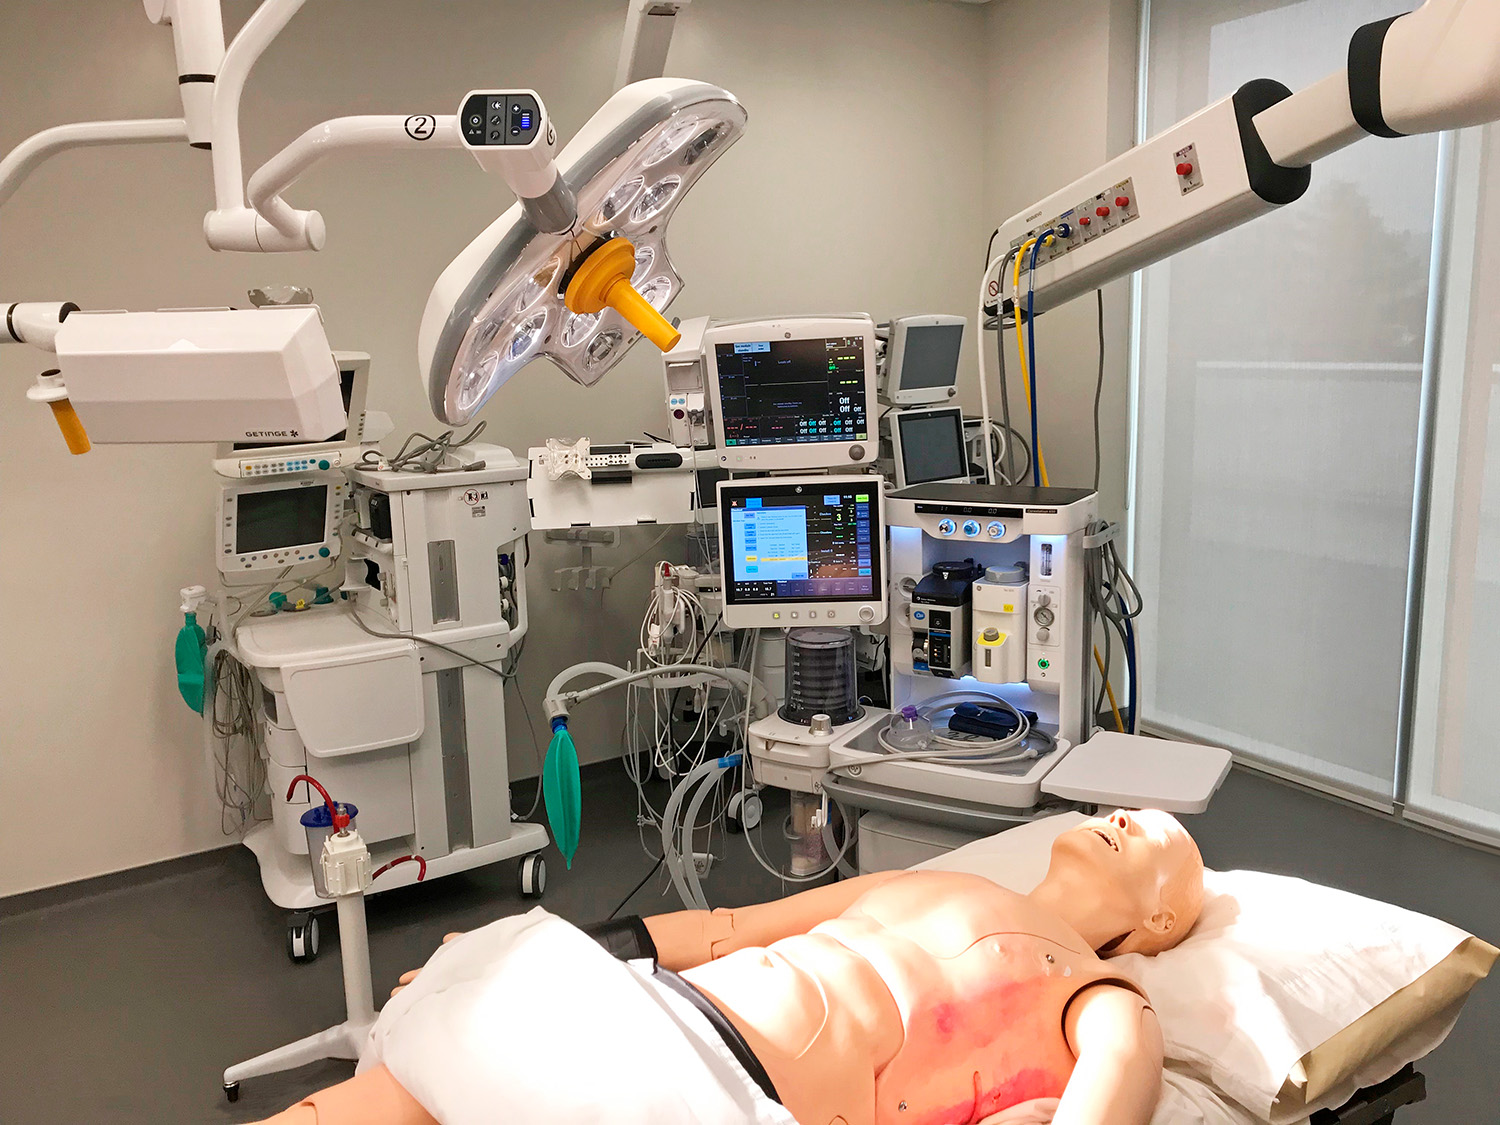 The 50+ human patient simulators available in a variety of sizes, ages, ethnicities, and physical conditions are easily moved among the various bed stations.